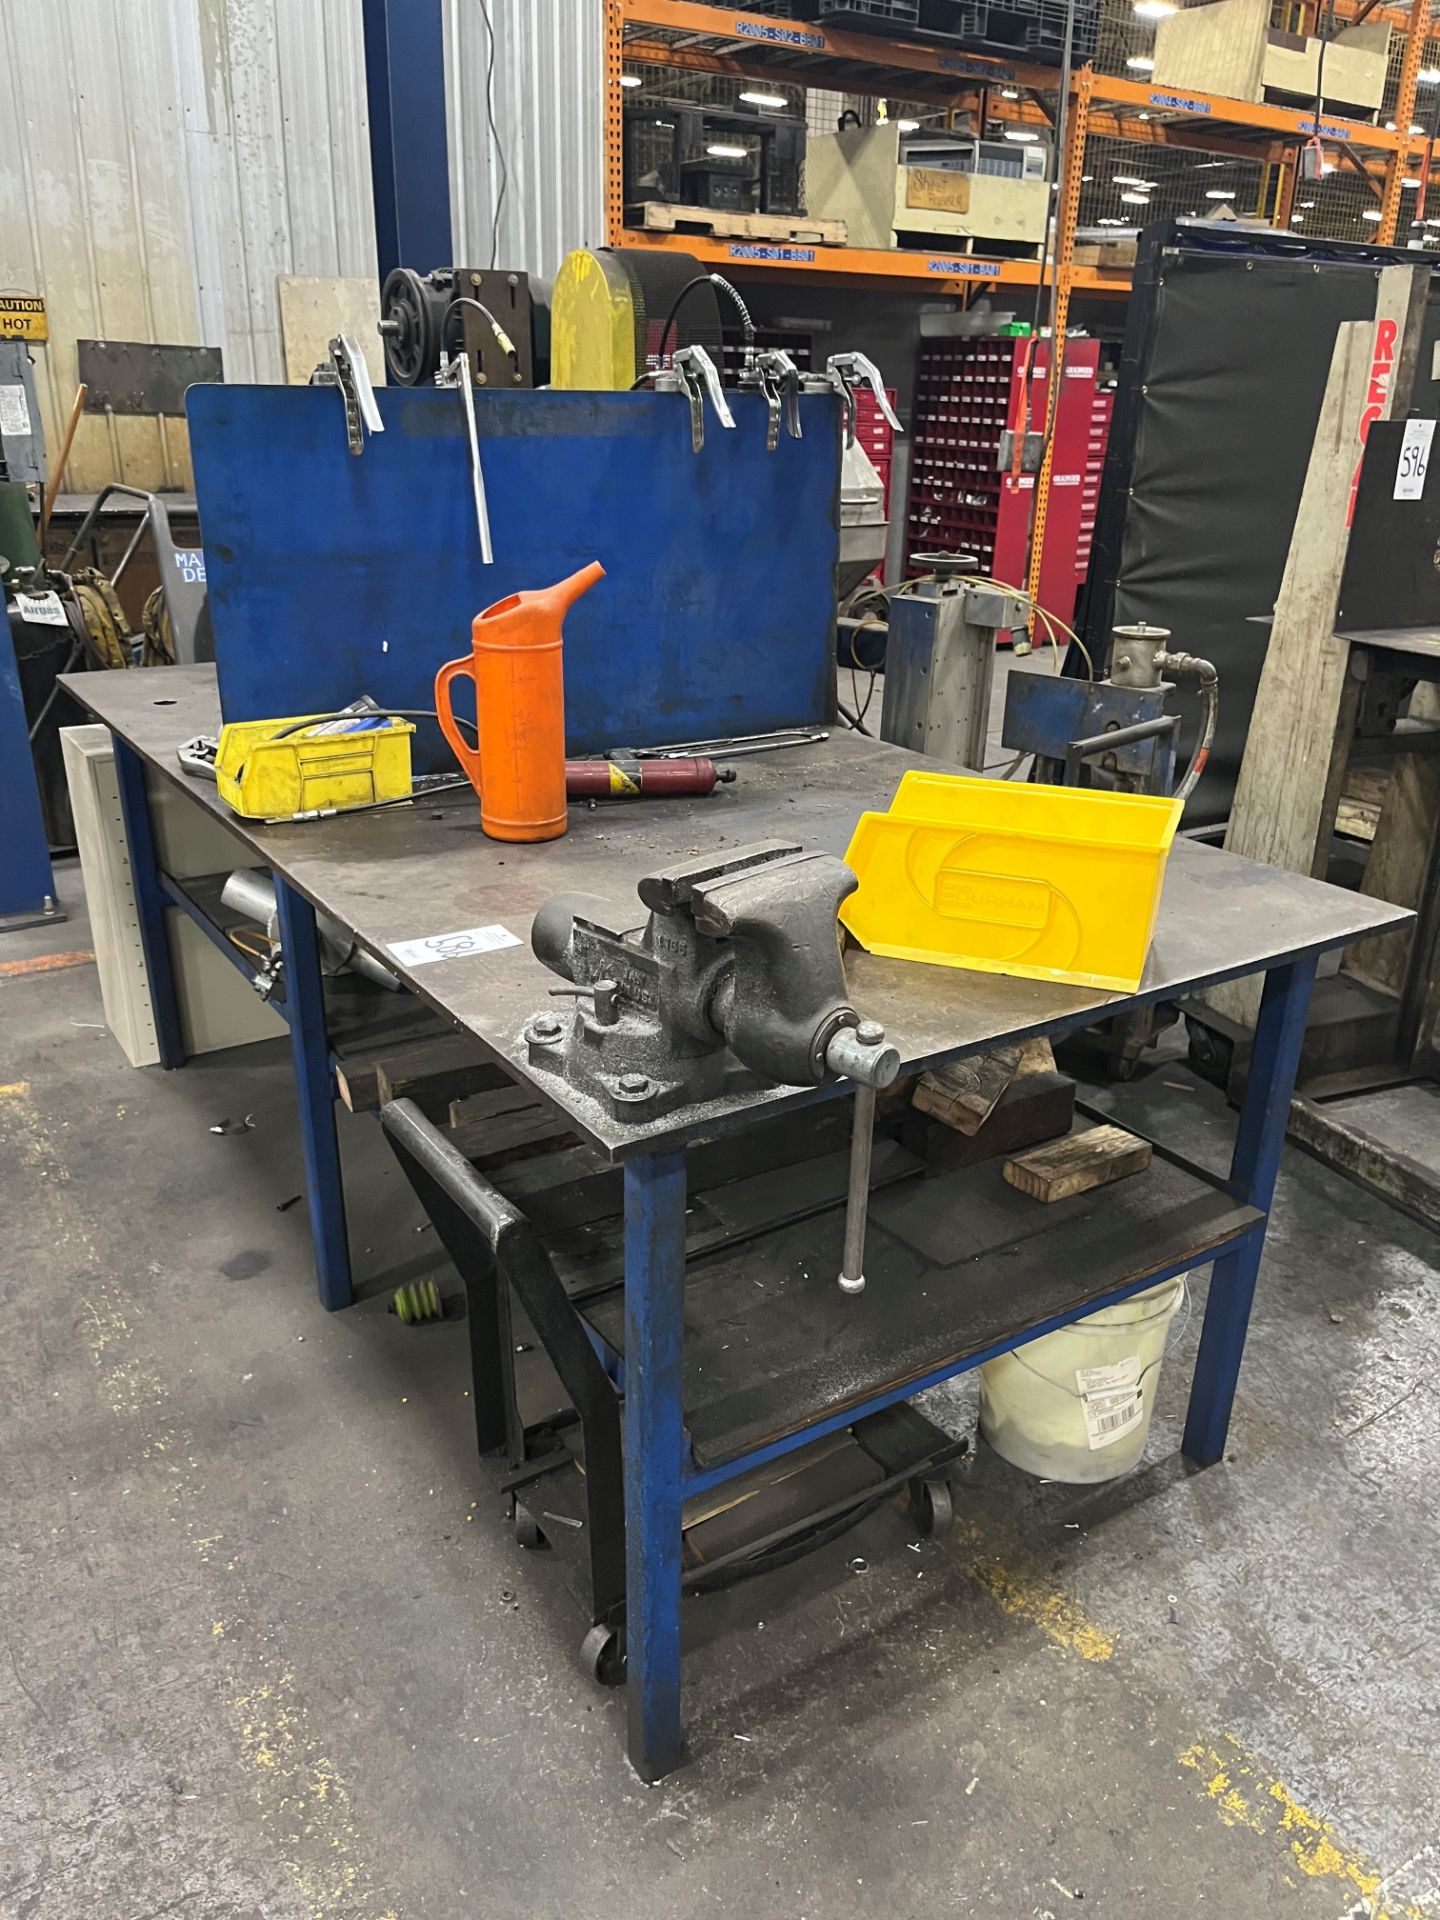 Metal shop table with 6" vise Shaper test bench